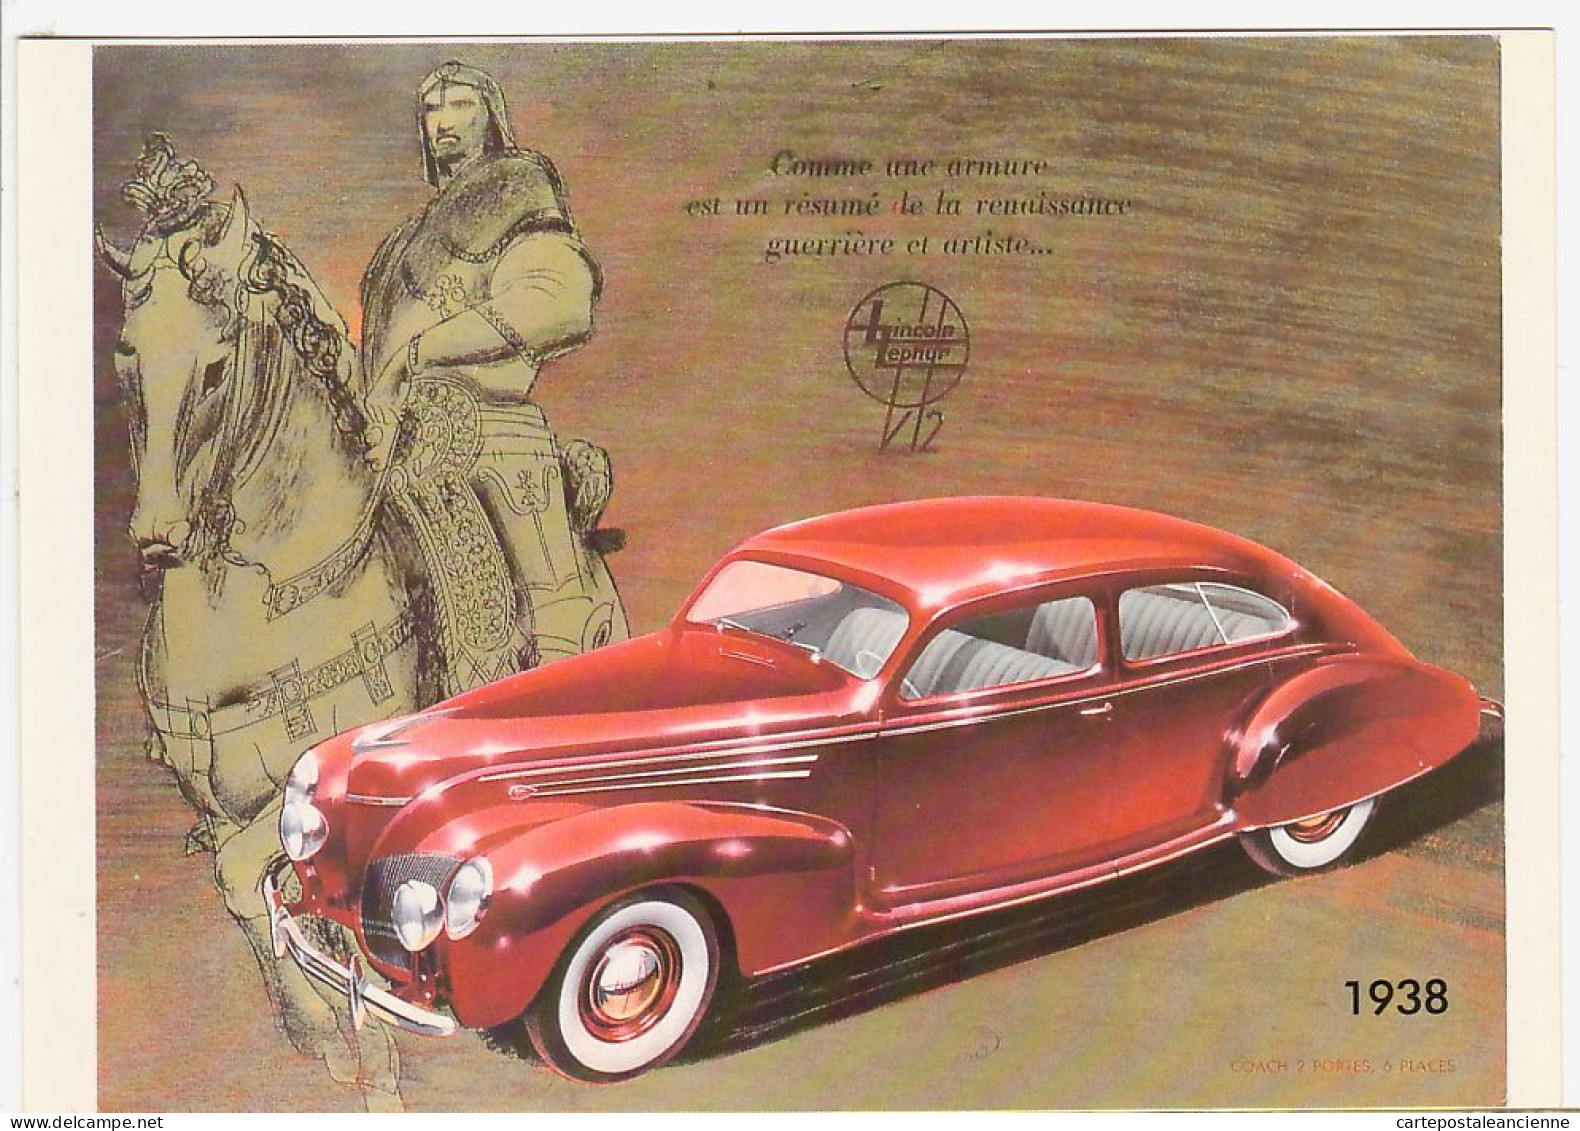 30744 / US LINCOLN ZEPHYR V12 MATFORD 1938 CPPUB 1980s Collection Bibliotheque FORNEY Paris AMORIMAGE LE LUXE N°9 - Toerisme